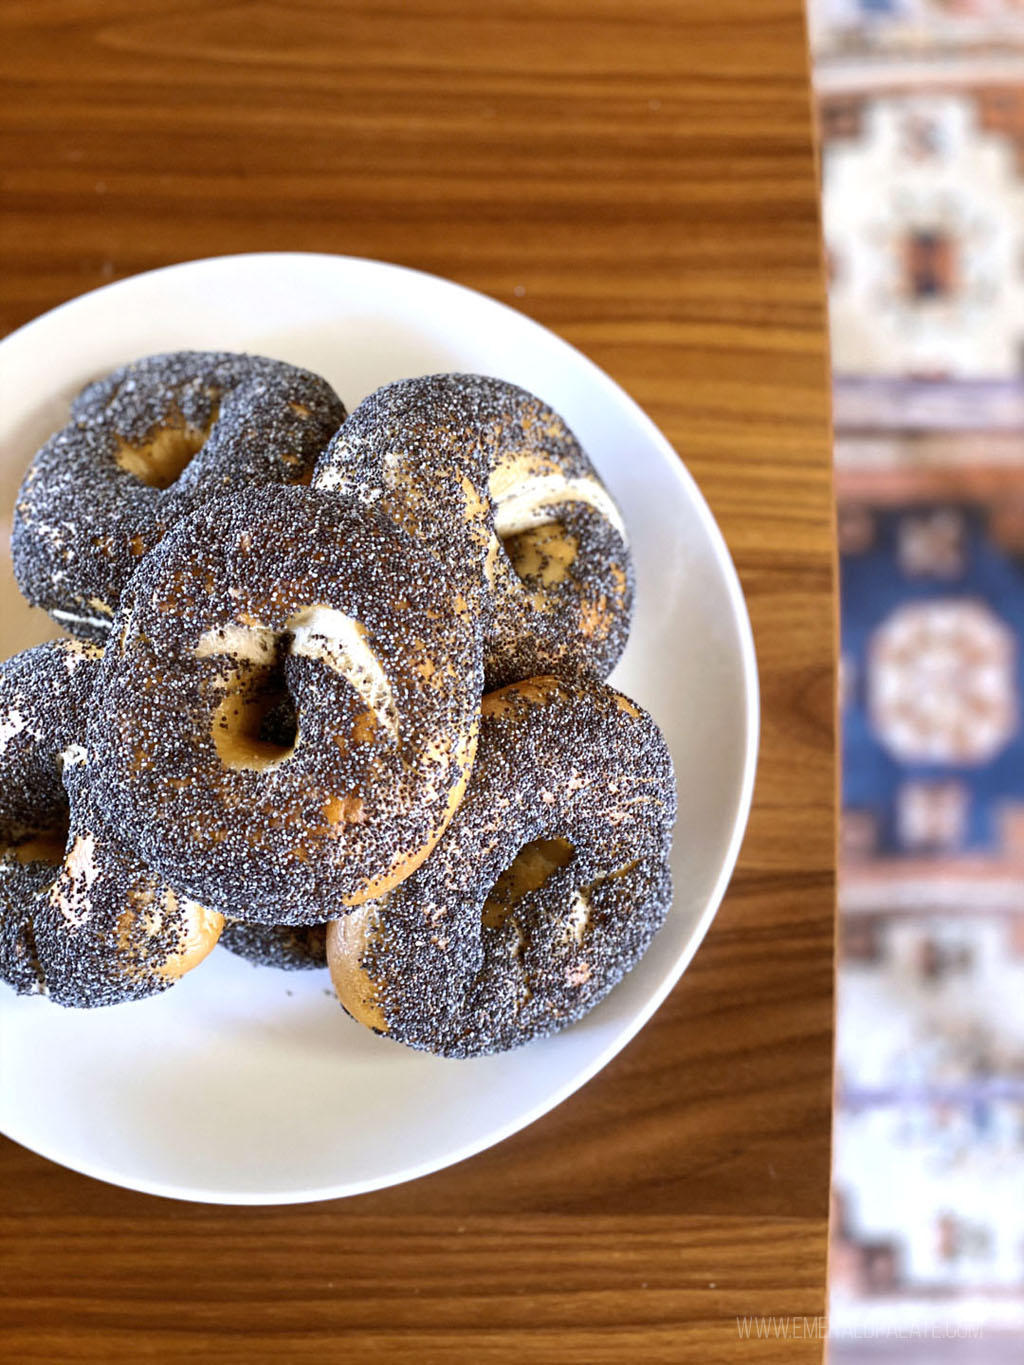 plate of poppy seed bagels from the spot with the best bagels in Seattle